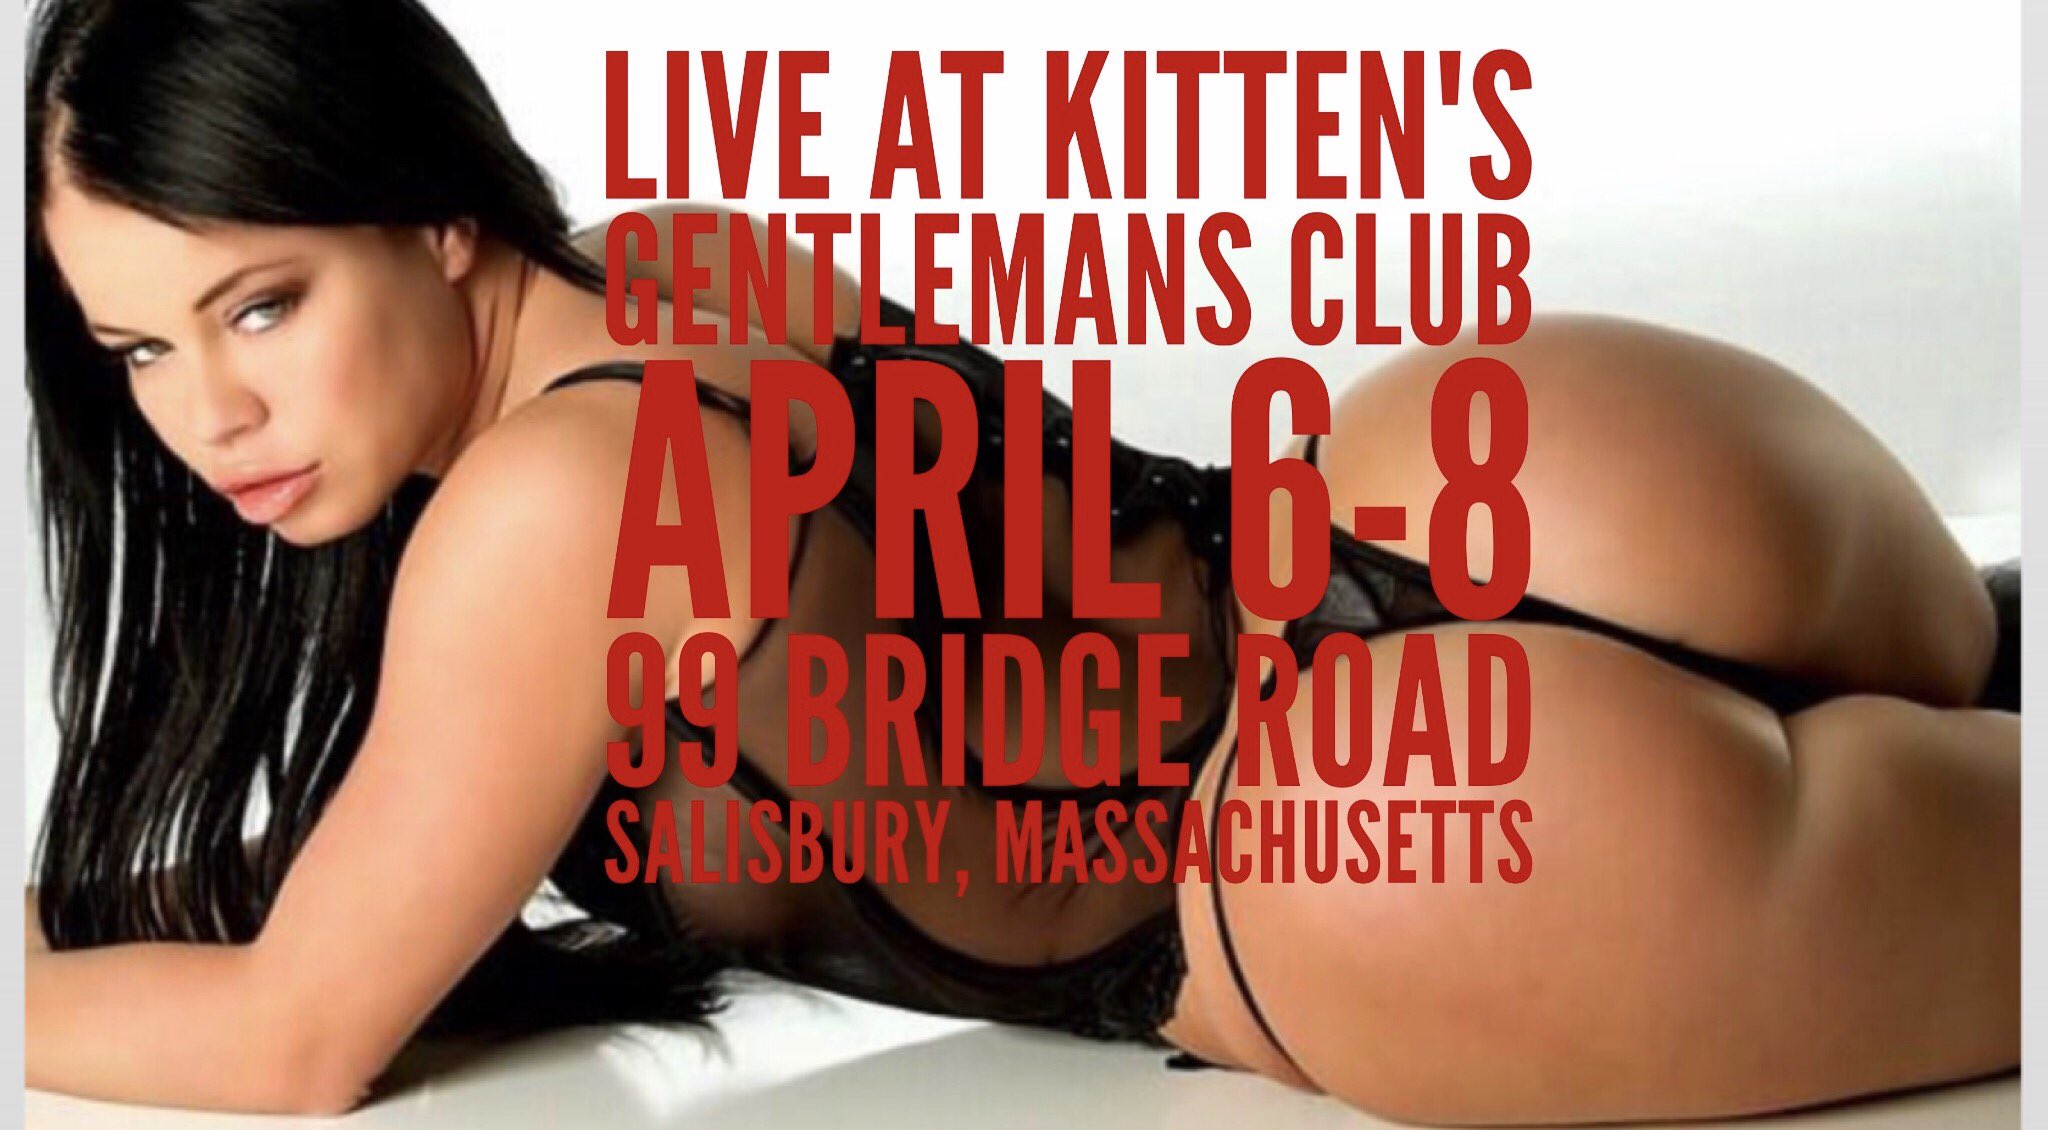 On my way to Kittens for my last night here in Massachusetts. 2 shows 1030 and 12am 💃💃💃💃 https://t.c